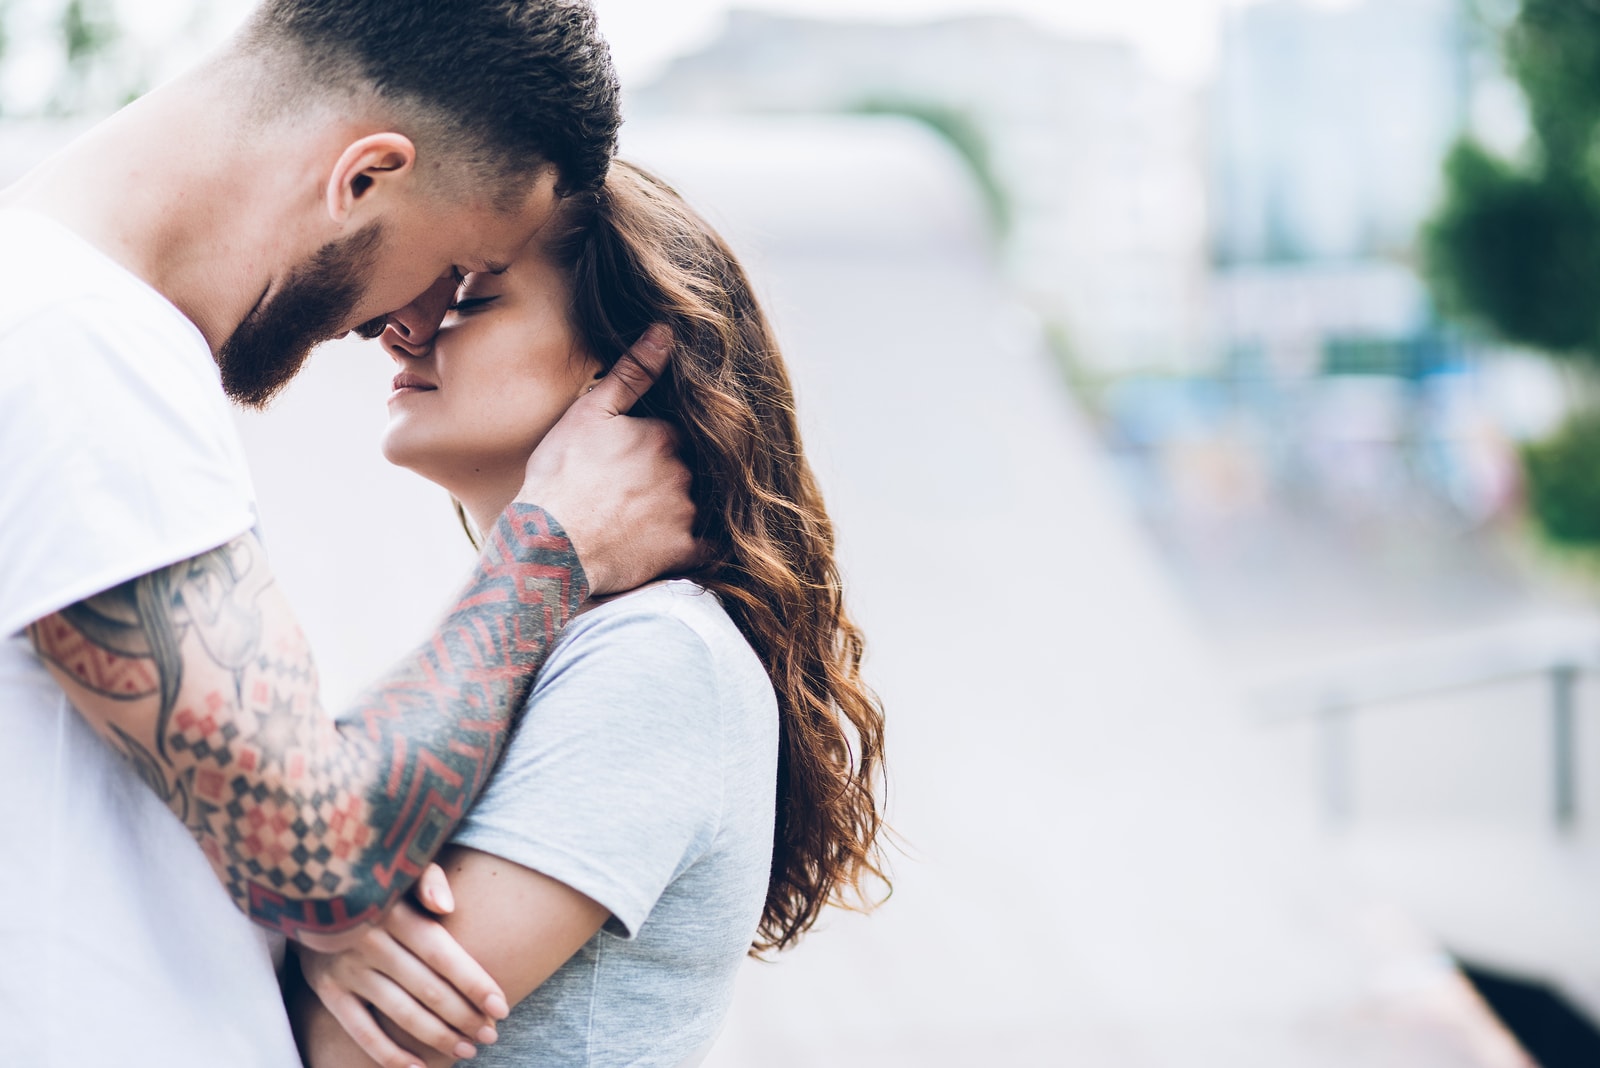 20 Perfectly Legit Reasons Why Men With Tattoos Are Every Girl's Dream